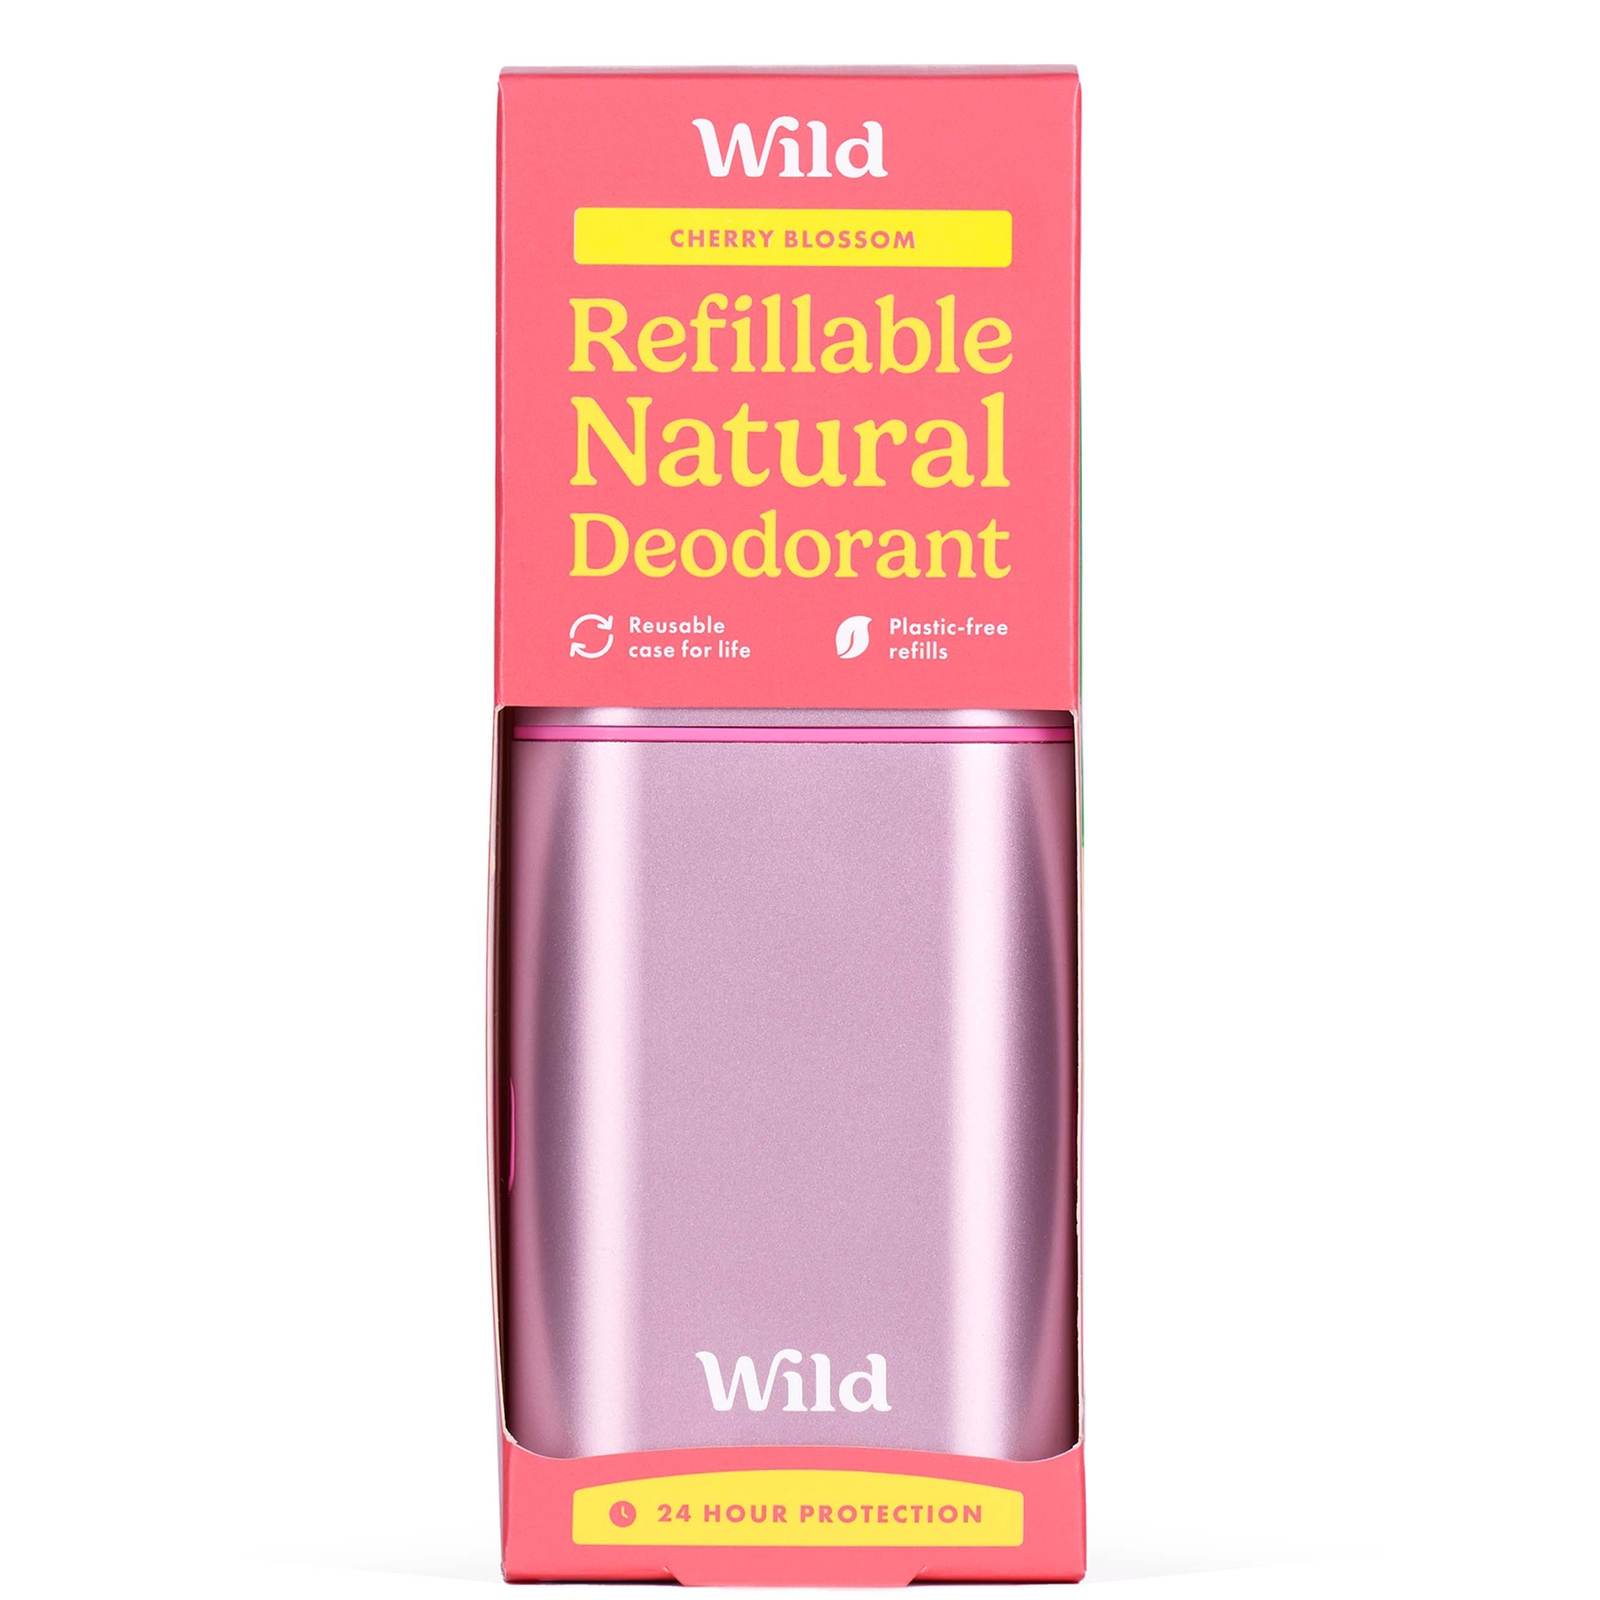 Image of Wild Cherry Blossom Deodorant in Pink Case 40g